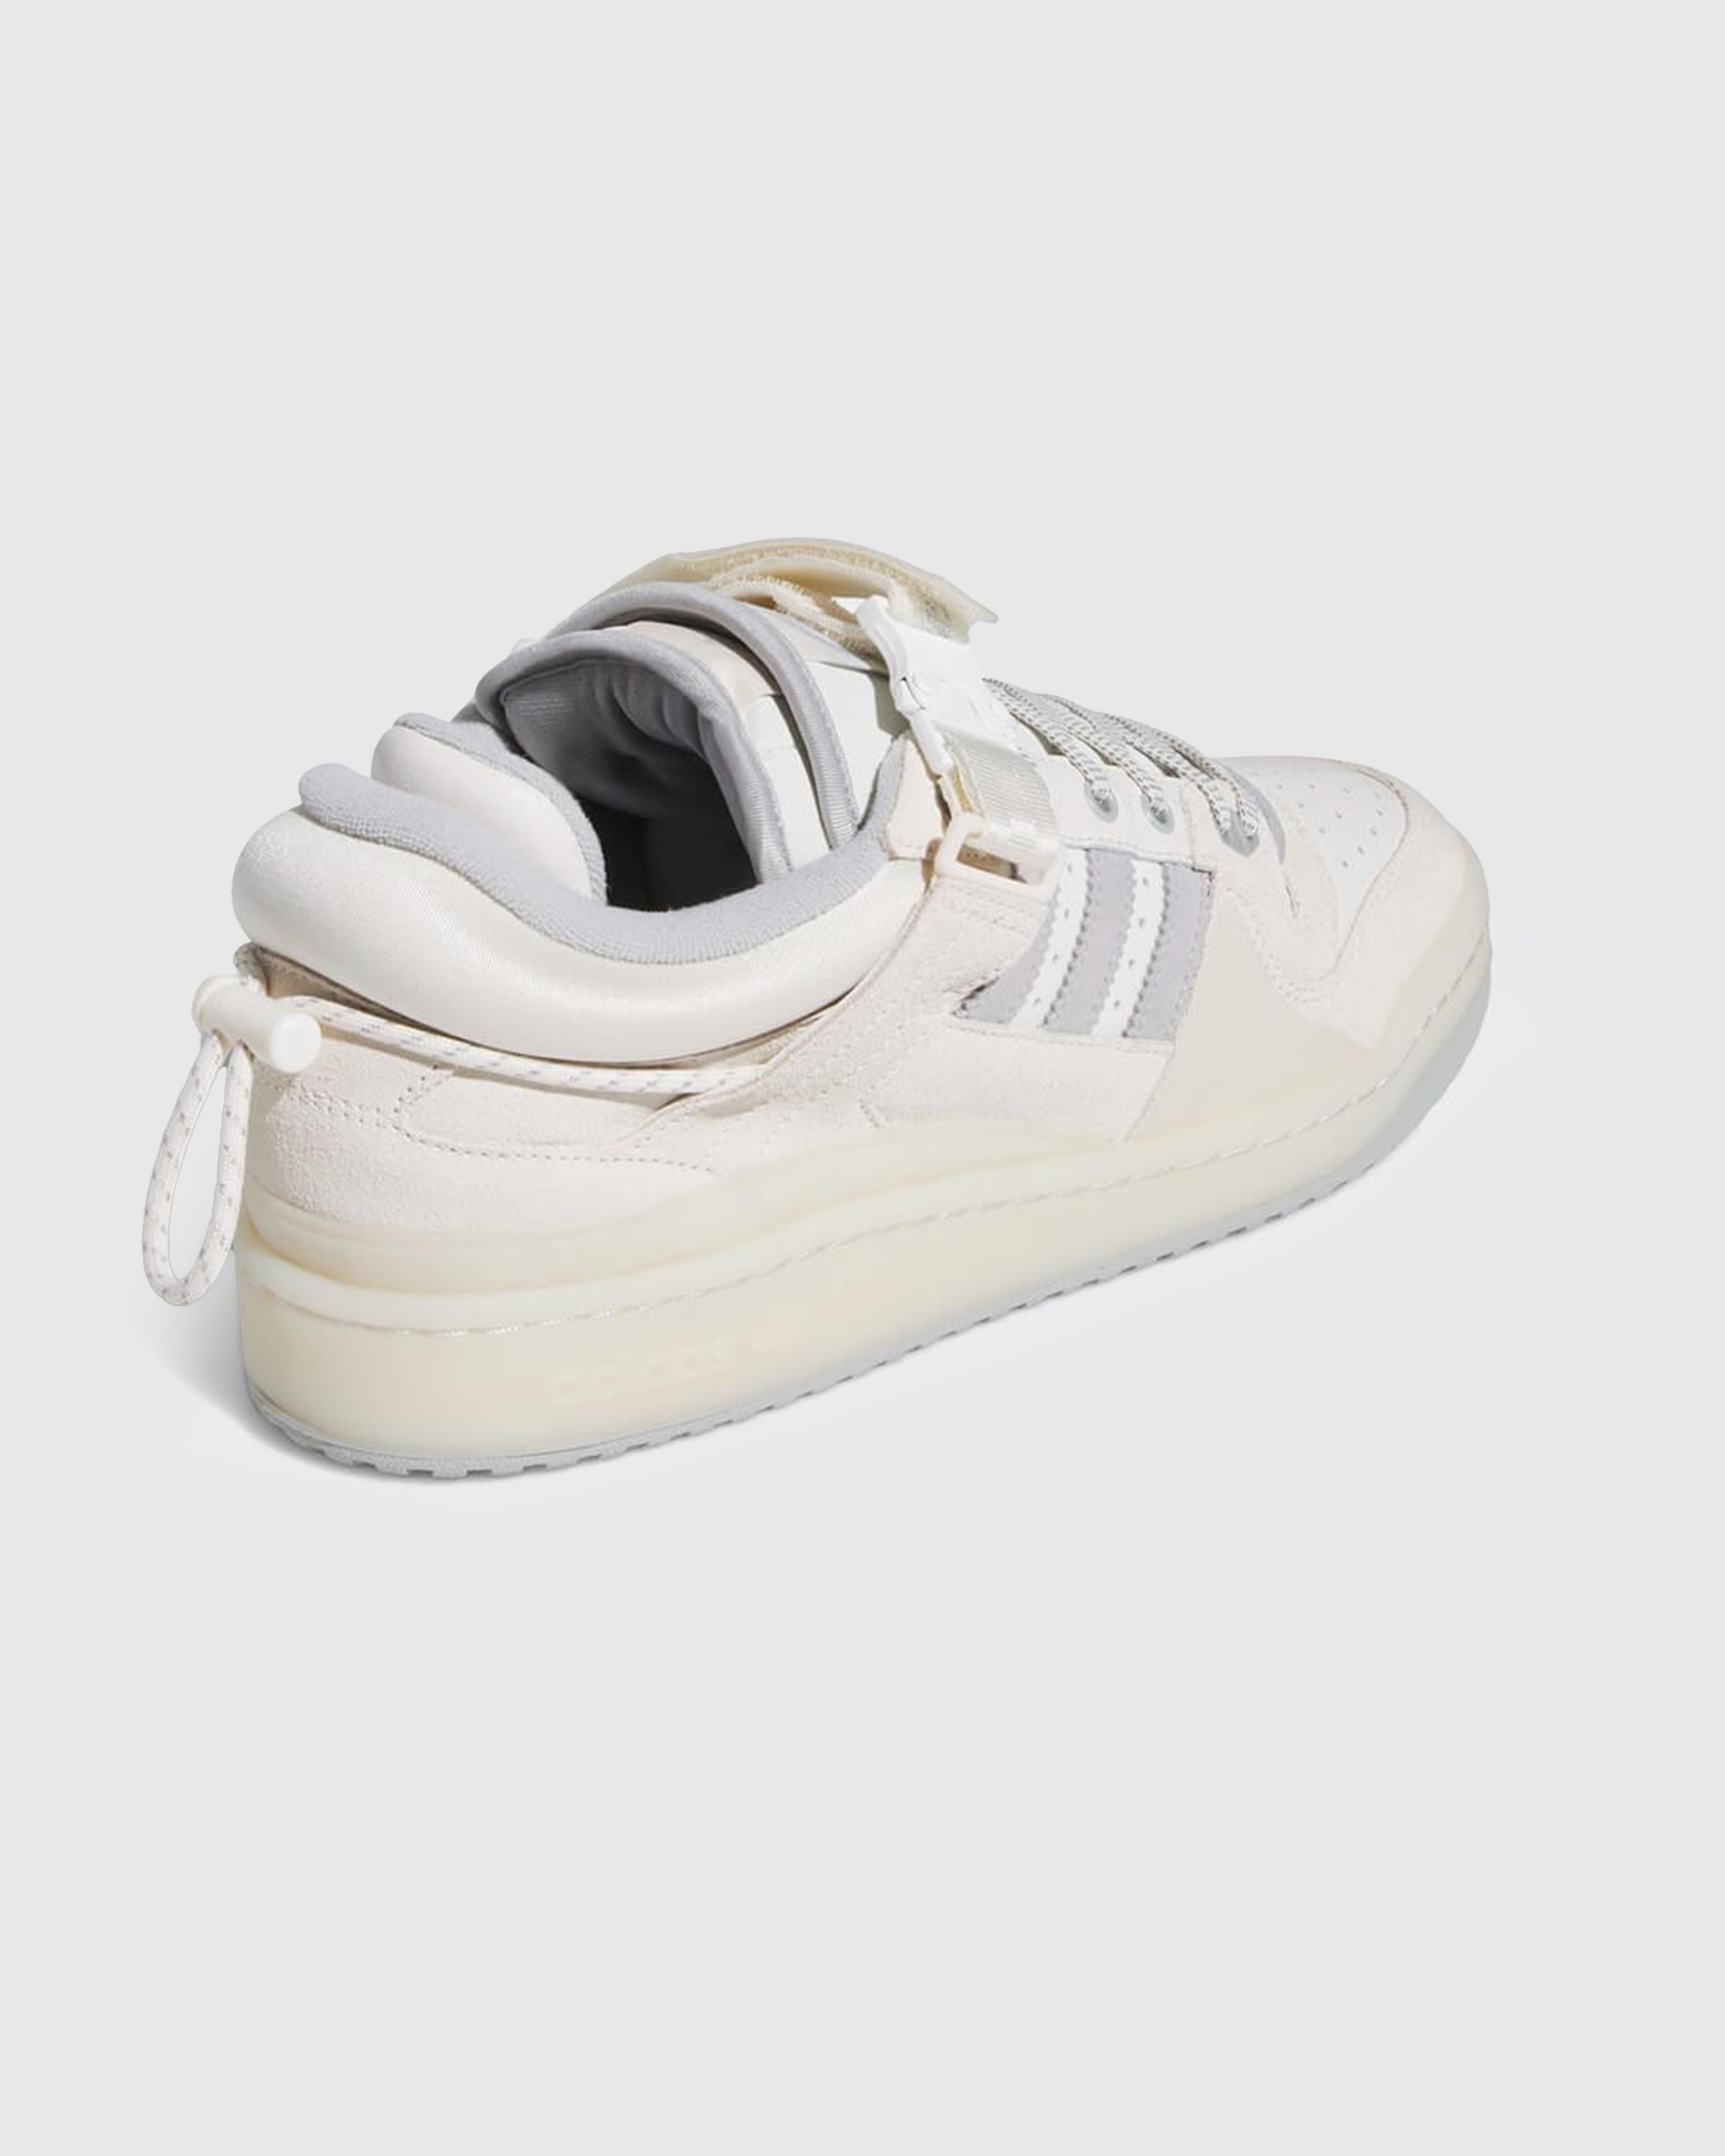 Adidas x Bad Bunny - Forum Low Cloud White/Clear Onix/Chalk White - Footwear - White - Image 6